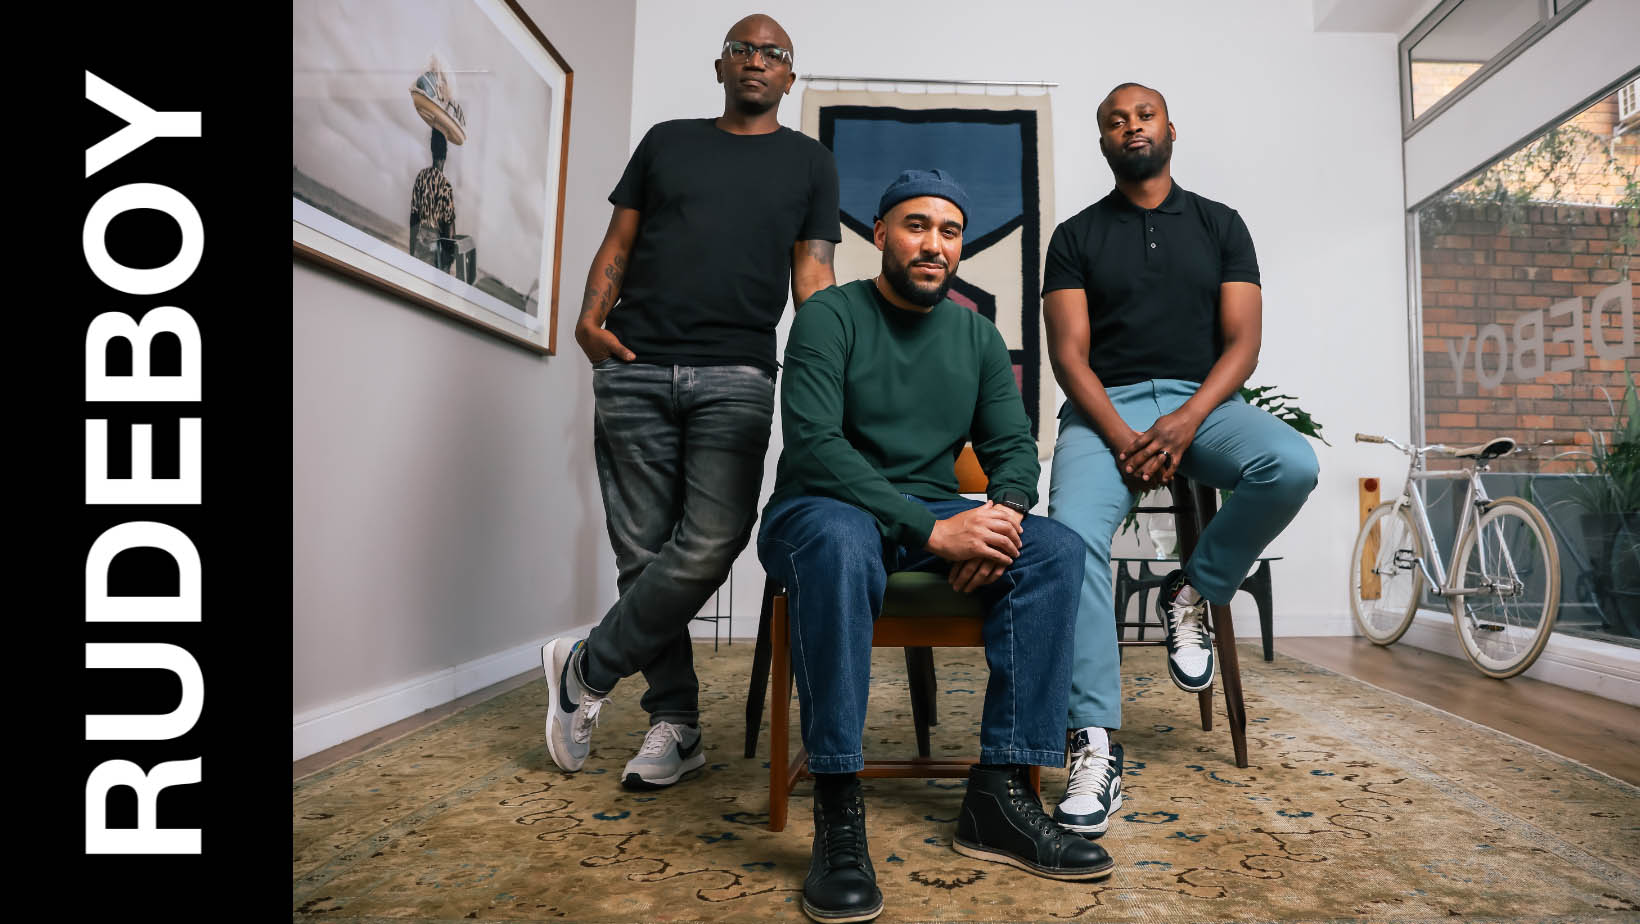 The Rudeboy Collective adds new energy with Batandwa Alperstein